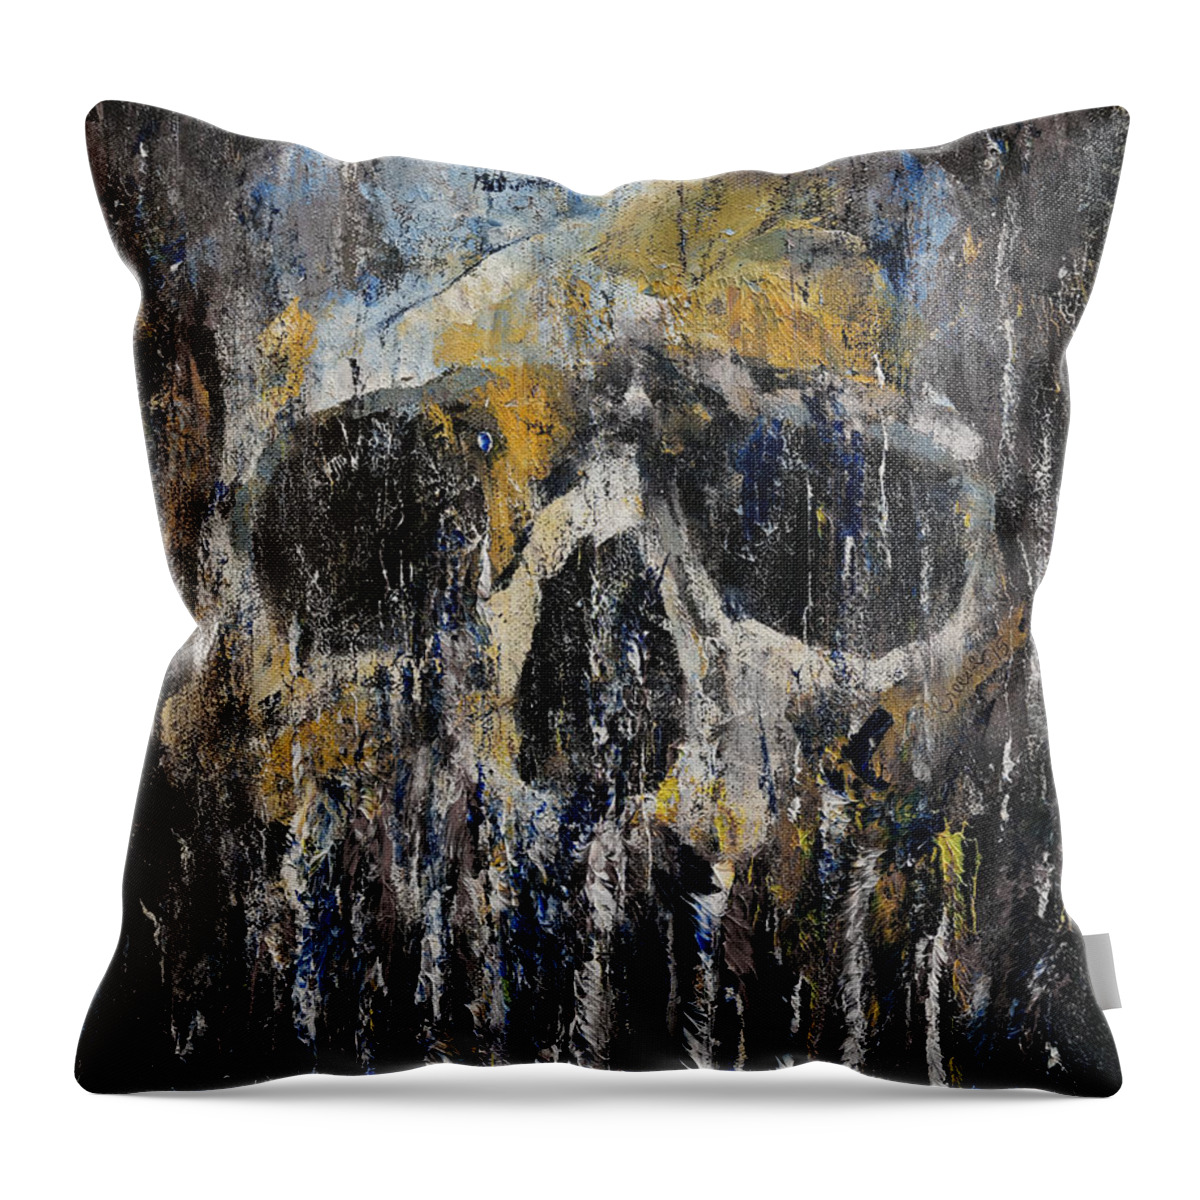 Cthulhu Throw Pillow featuring the painting Cthulhu Skull by Michael Creese